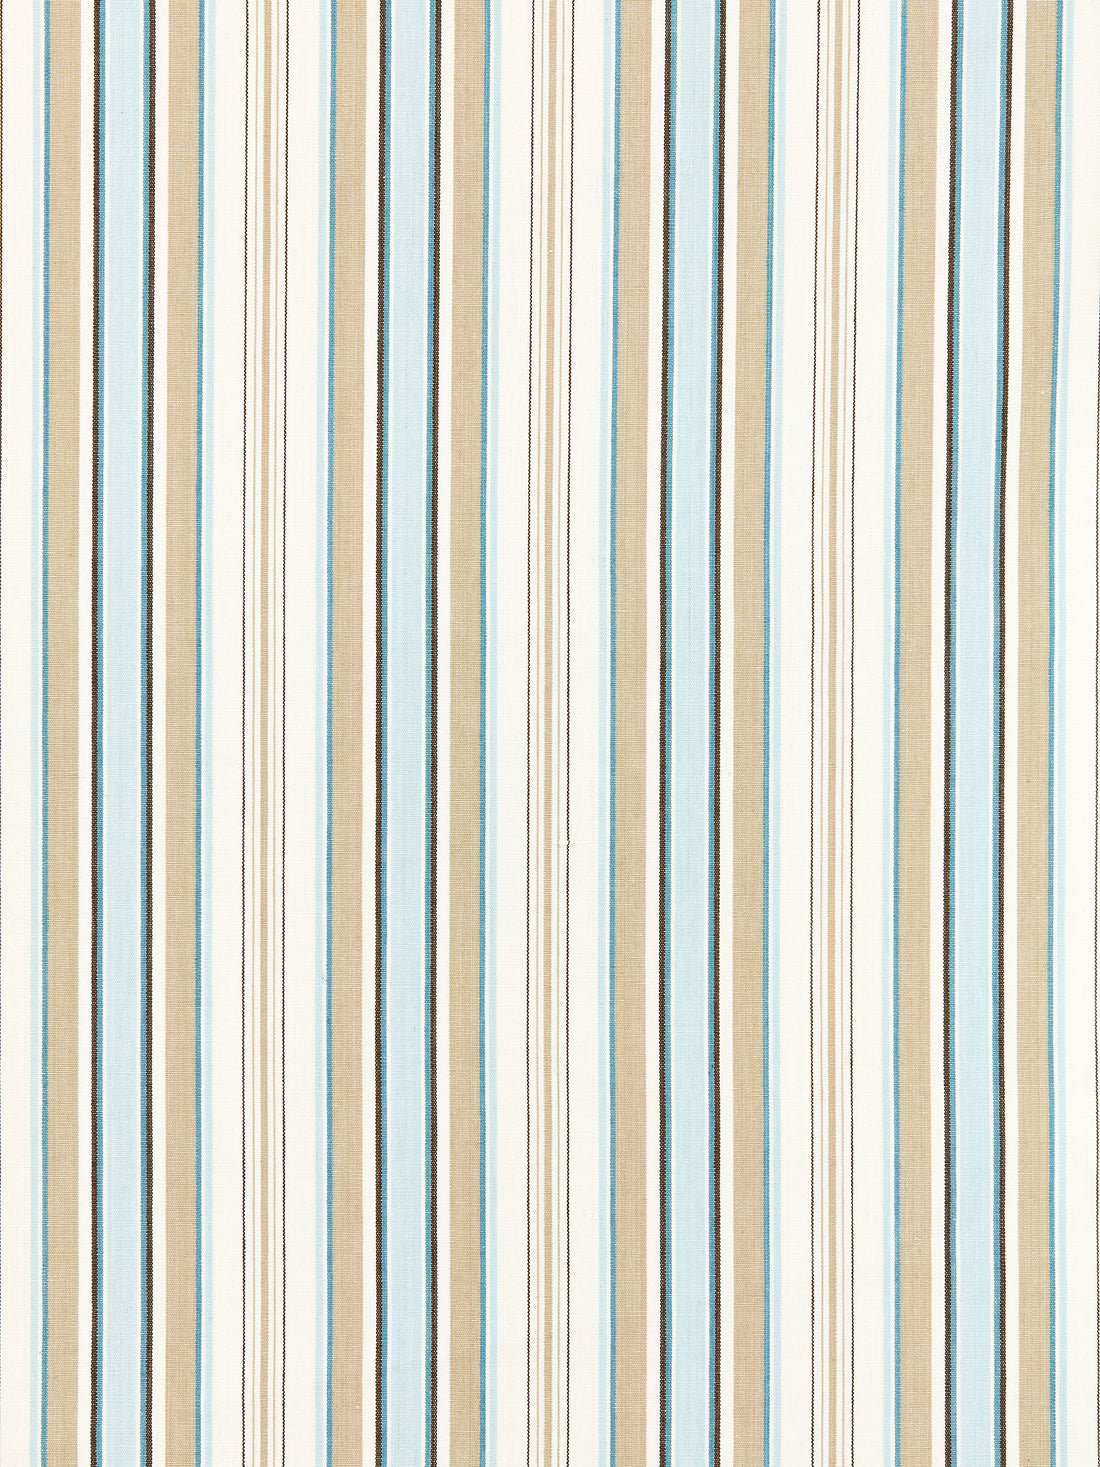 Andover Cotton Stripe fabric in capri color - pattern number SC 000227113 - by Scalamandre in the Scalamandre Fabrics Book 1 collection